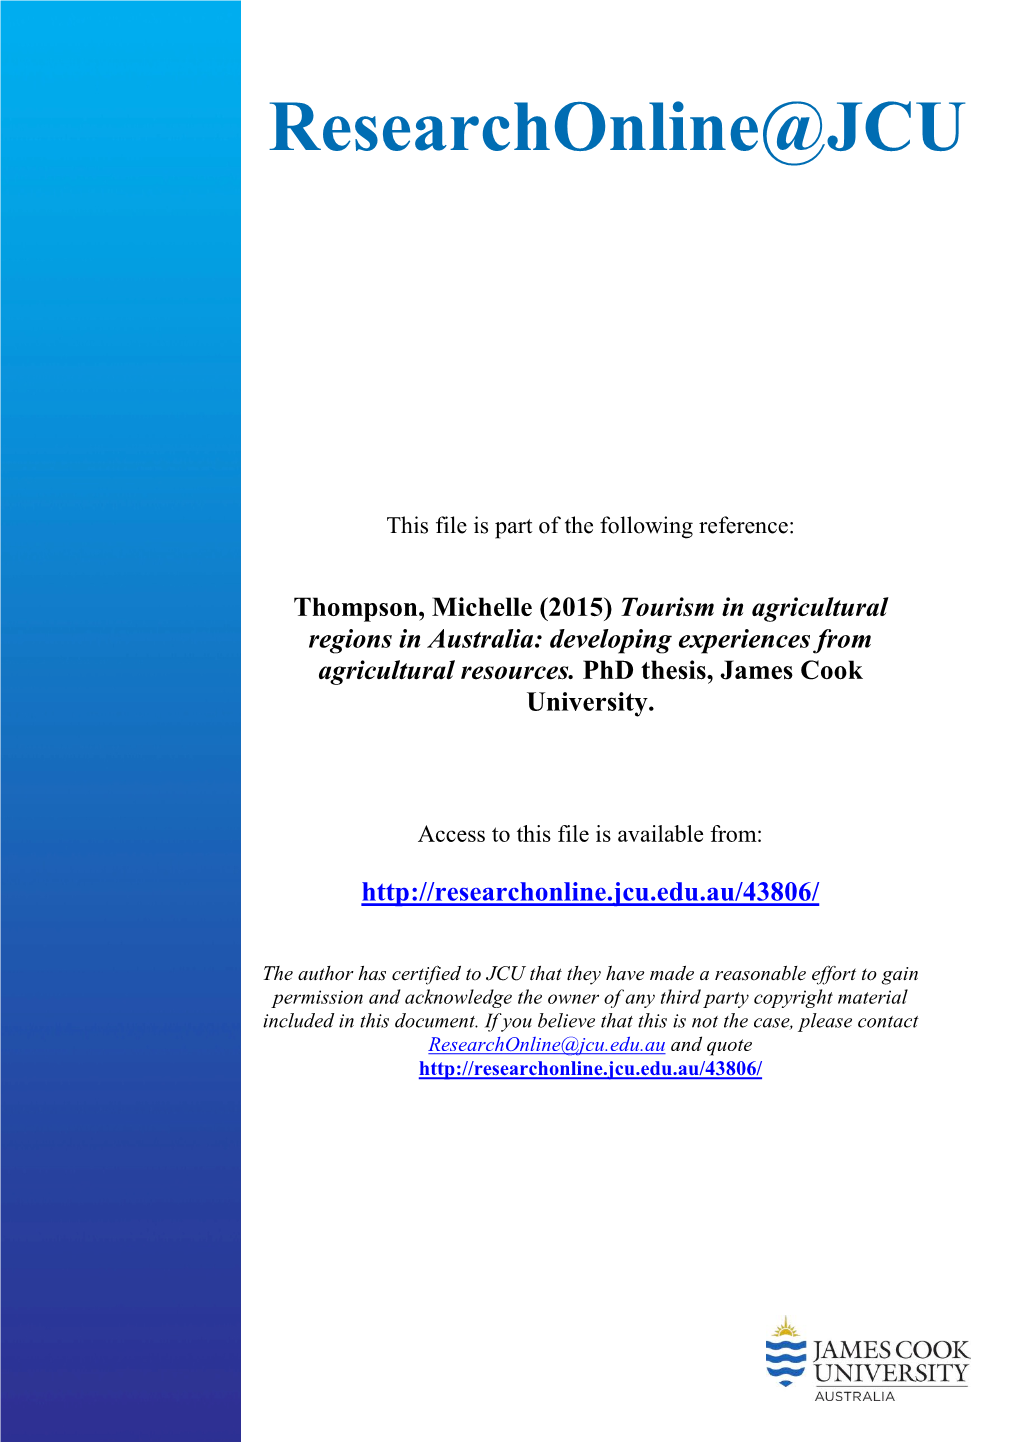 Tourism in Agricultural Regions in Australia: Developing Experiences from Agricultural Resources